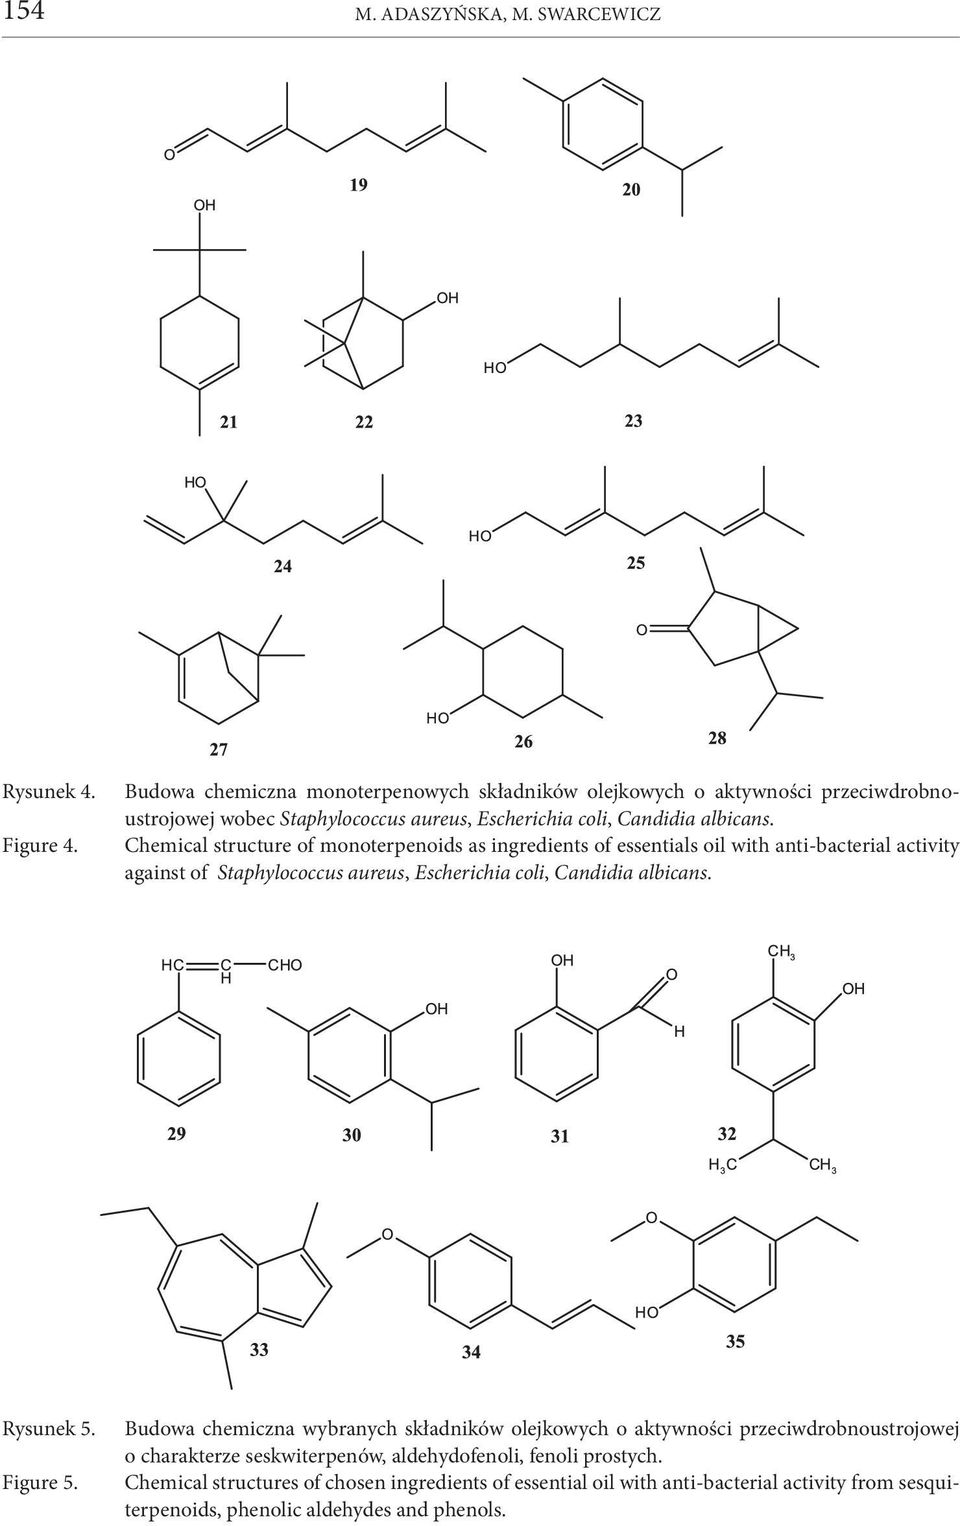 Chemical structure of monoterpenoids as ingredients of essentials oil with anti-bacterial activity against of Staphylococcus aureus, Escherichia coli, Candidia albicans.